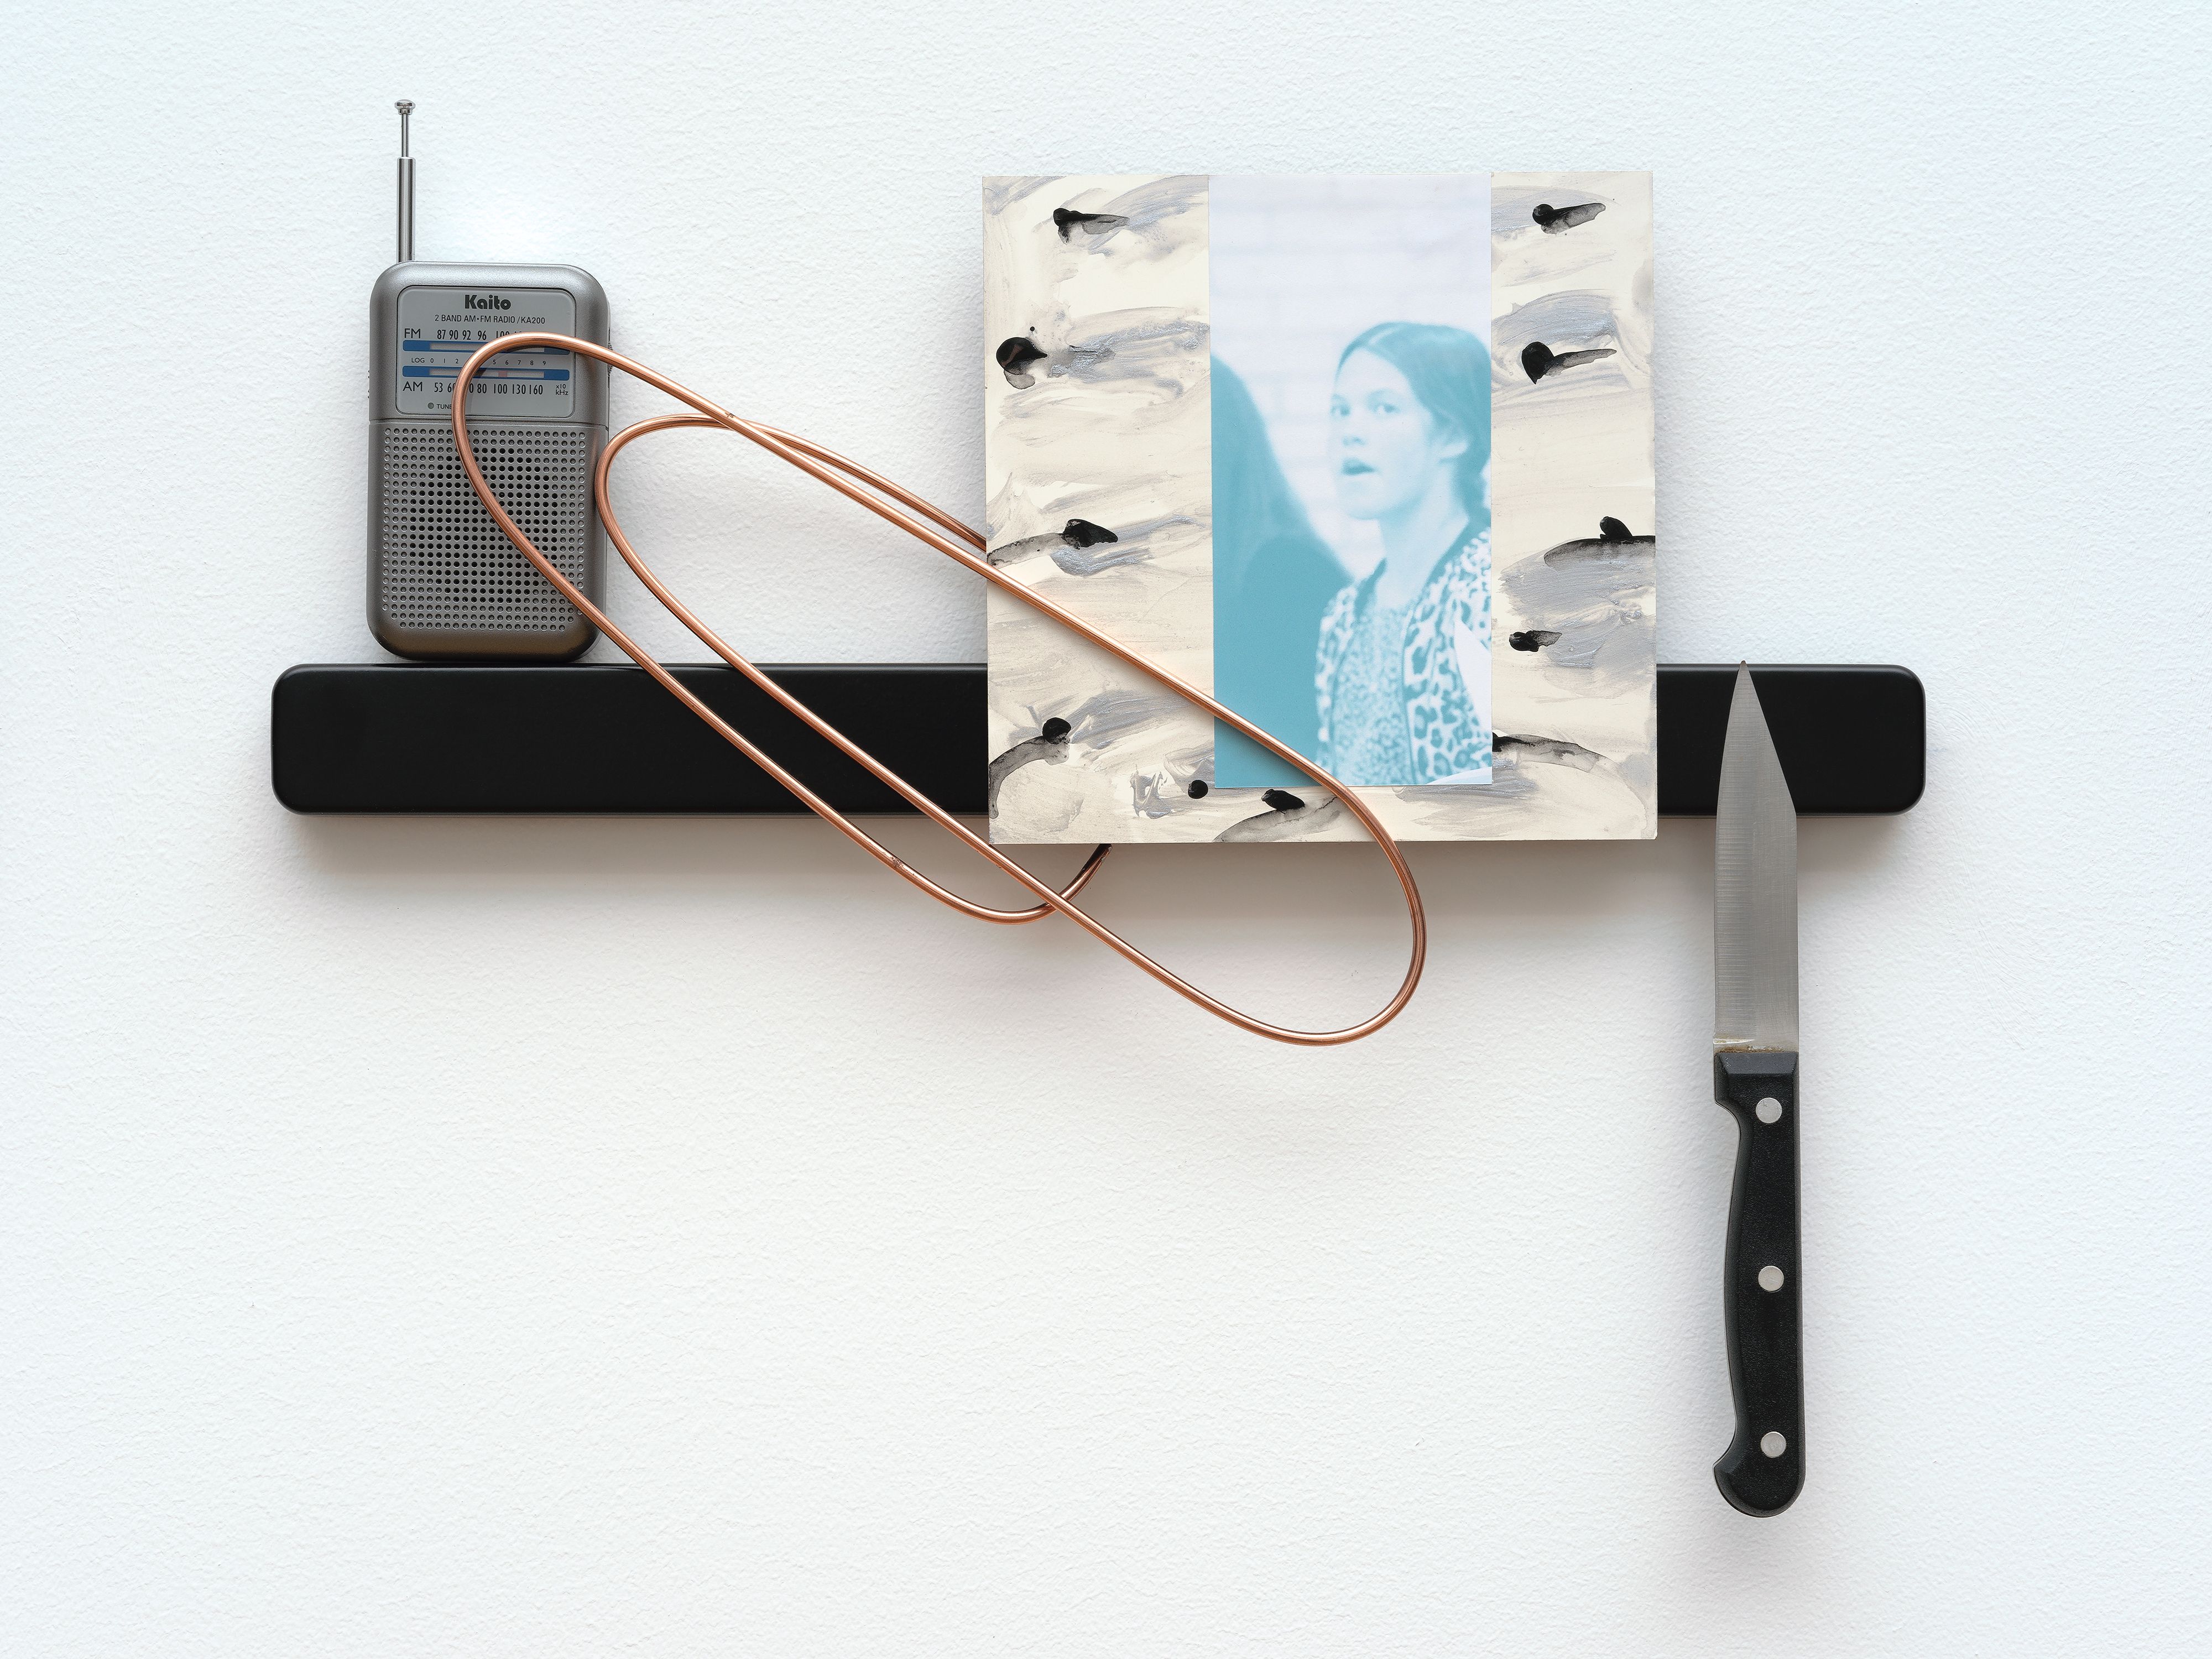 Sara Magenheimer, Marjorie, 2016, knife rack, painted steel wire, collaged pigment print on painted clay board, radio, knife 12 x 14 1/2 in. (30.48 x 36.83 cm)